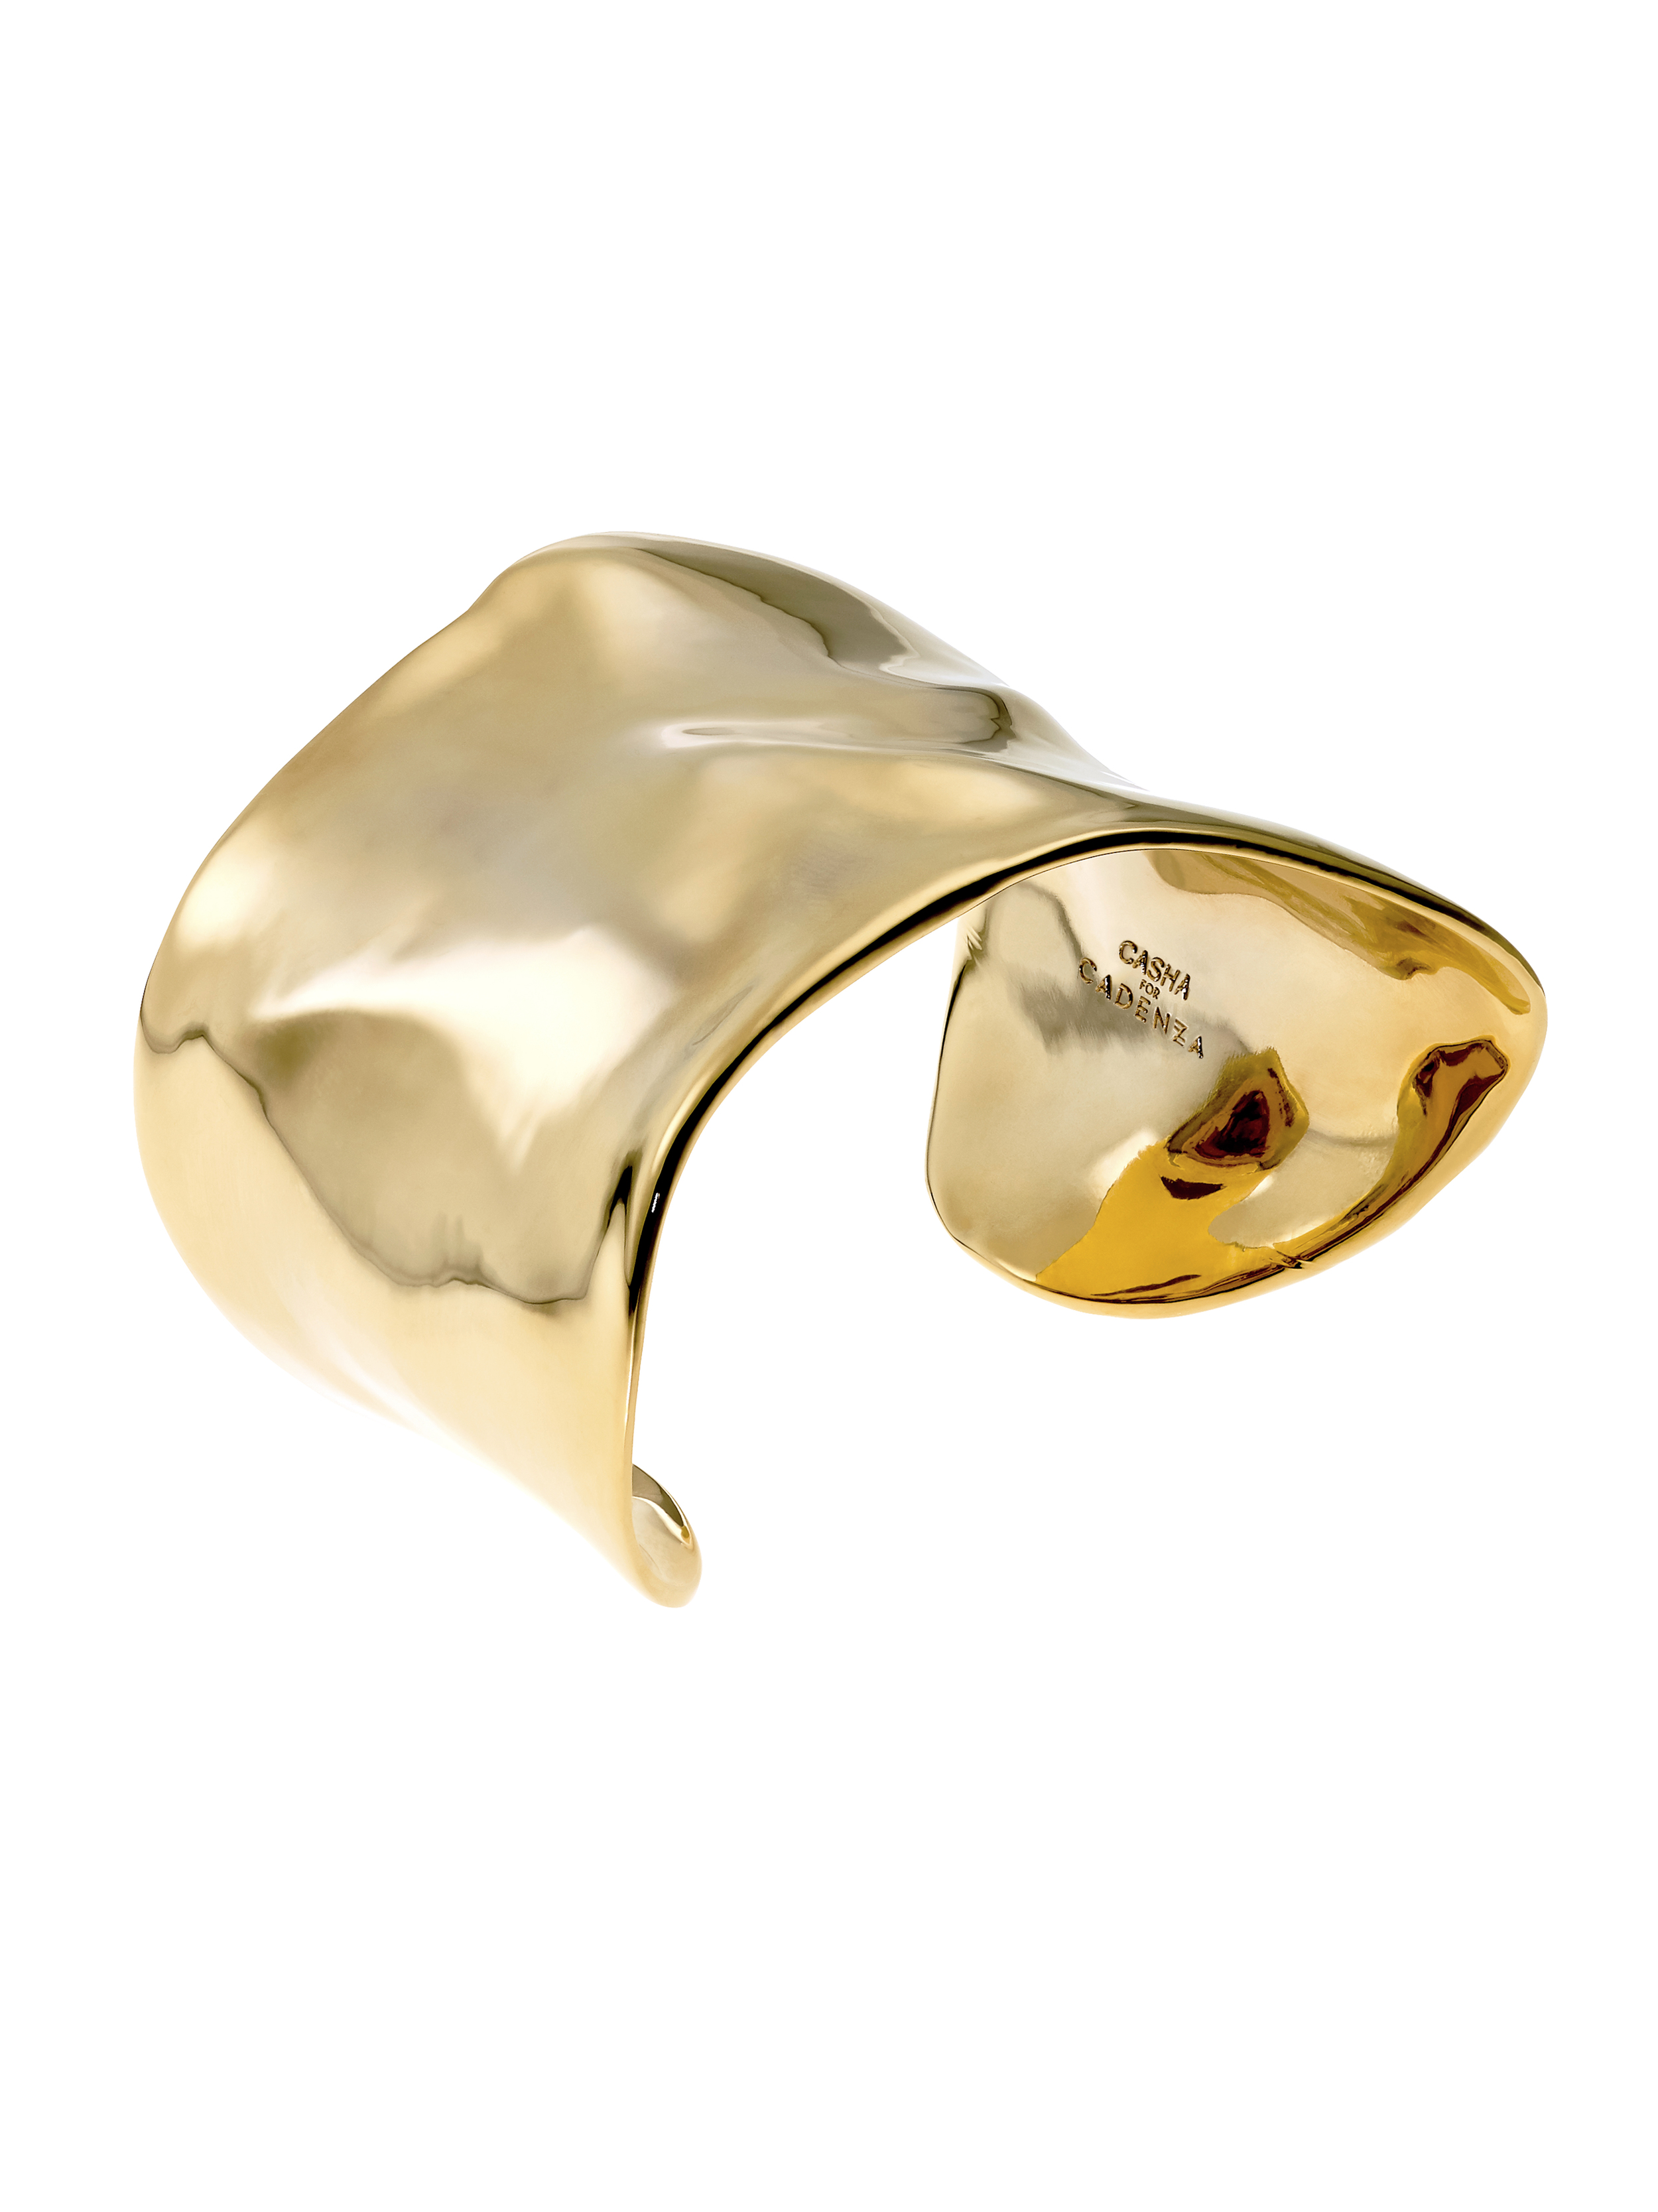 Copy of Armreif / Cuff in Gold